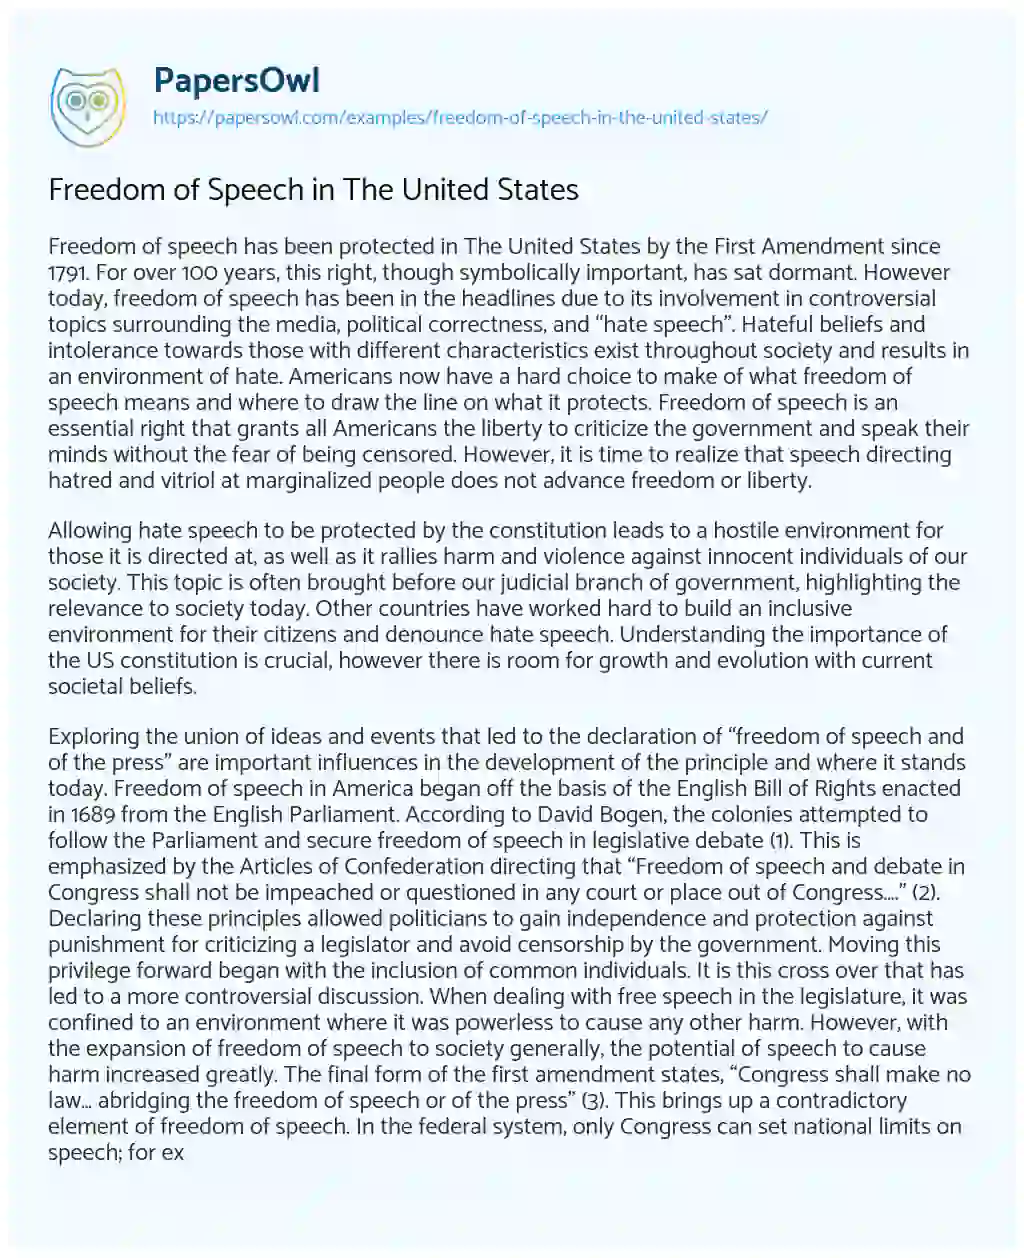 Essay on Freedom of Speech in the United States